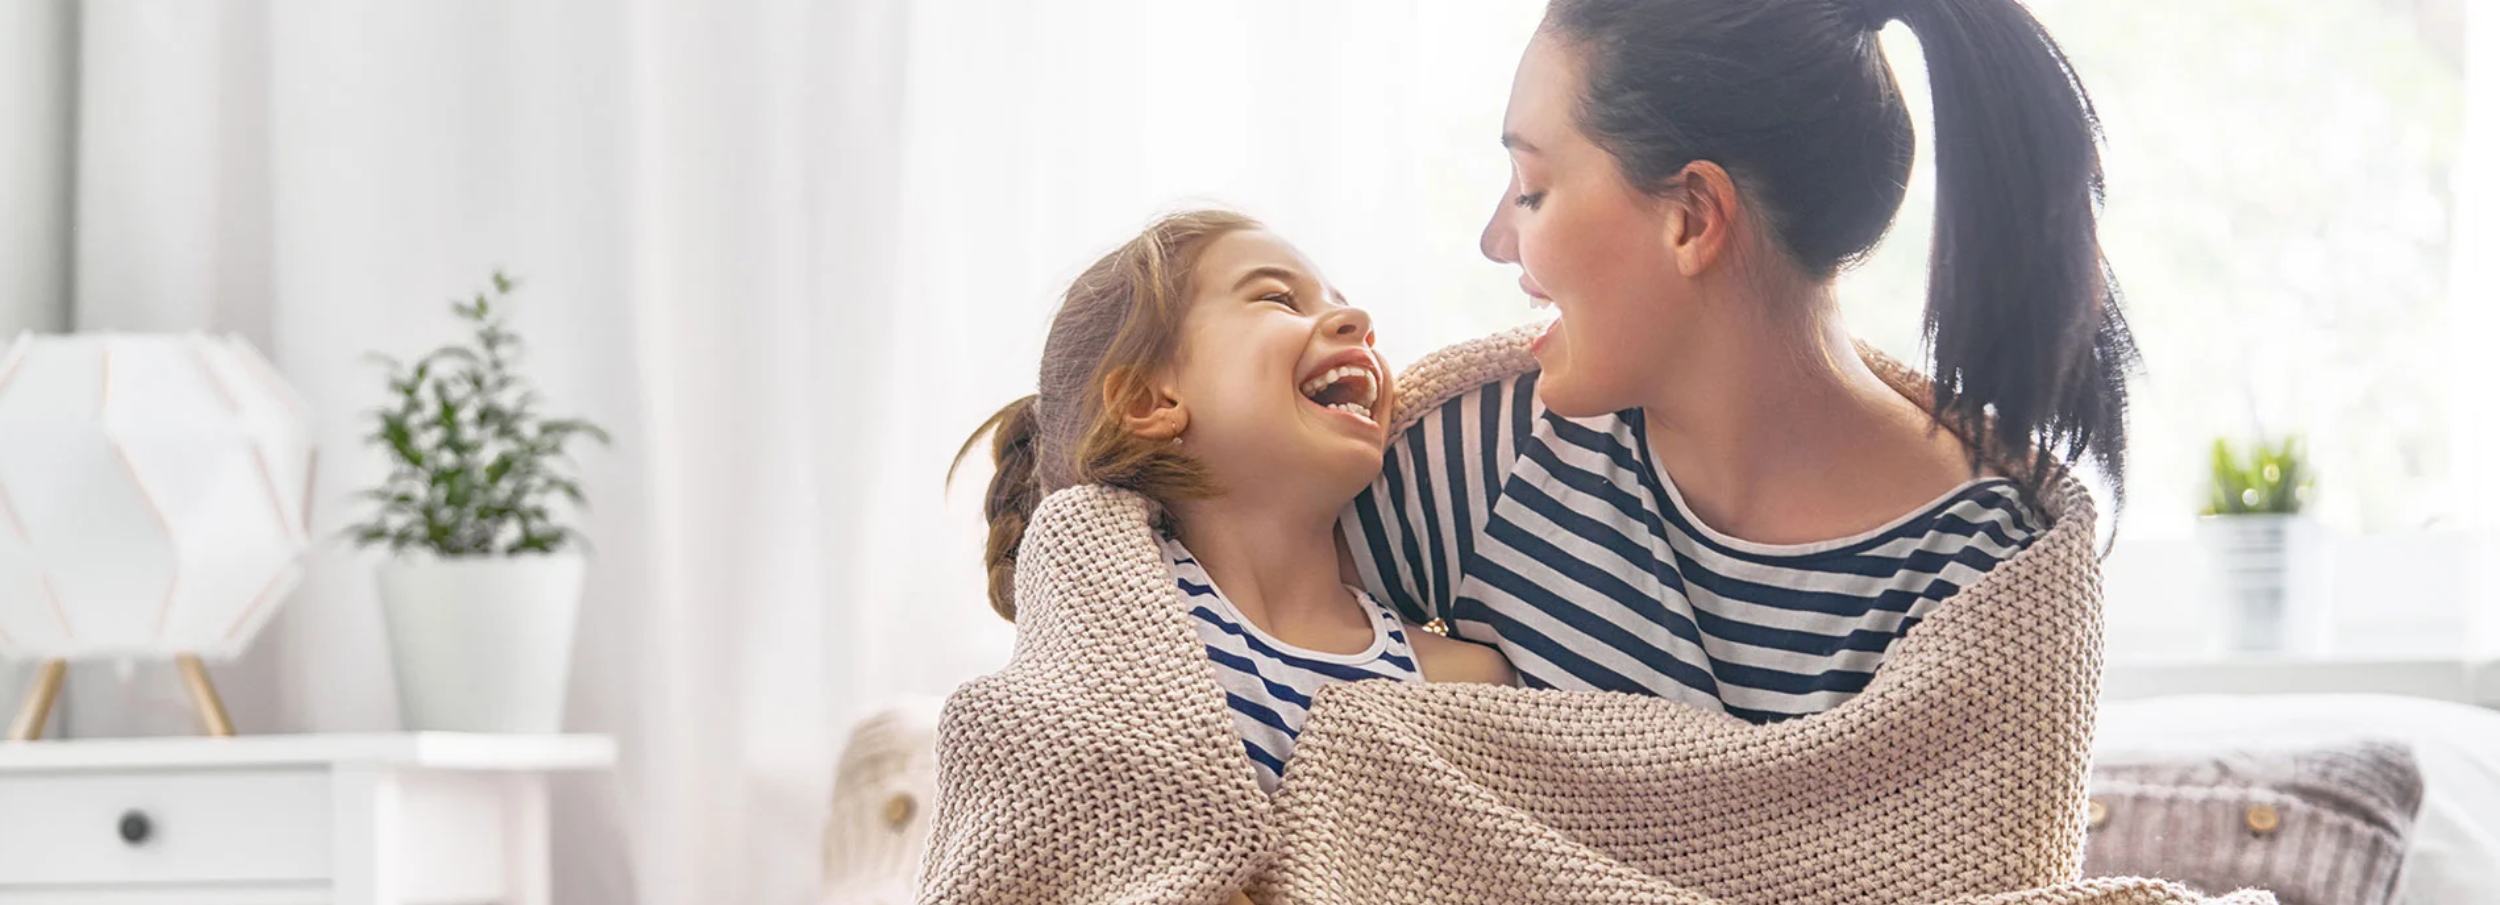 Mother and daughter wrapped in taupe blanket together smiling and laughing in brightly lit living room.